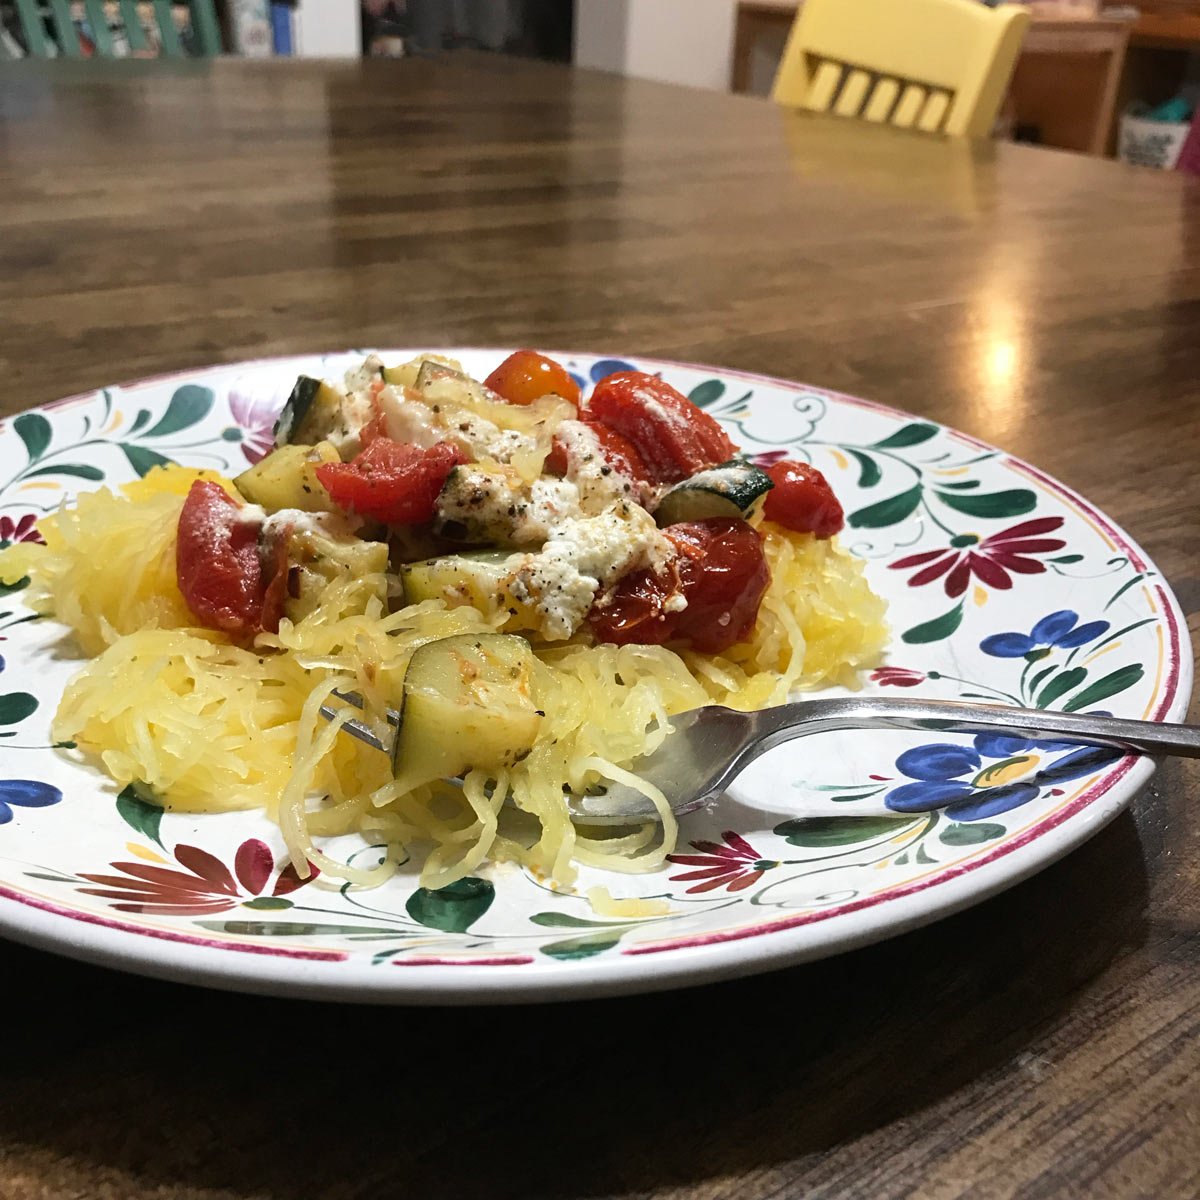 flowered plate with roast vegetables and goat cheese on spaghetti squash.